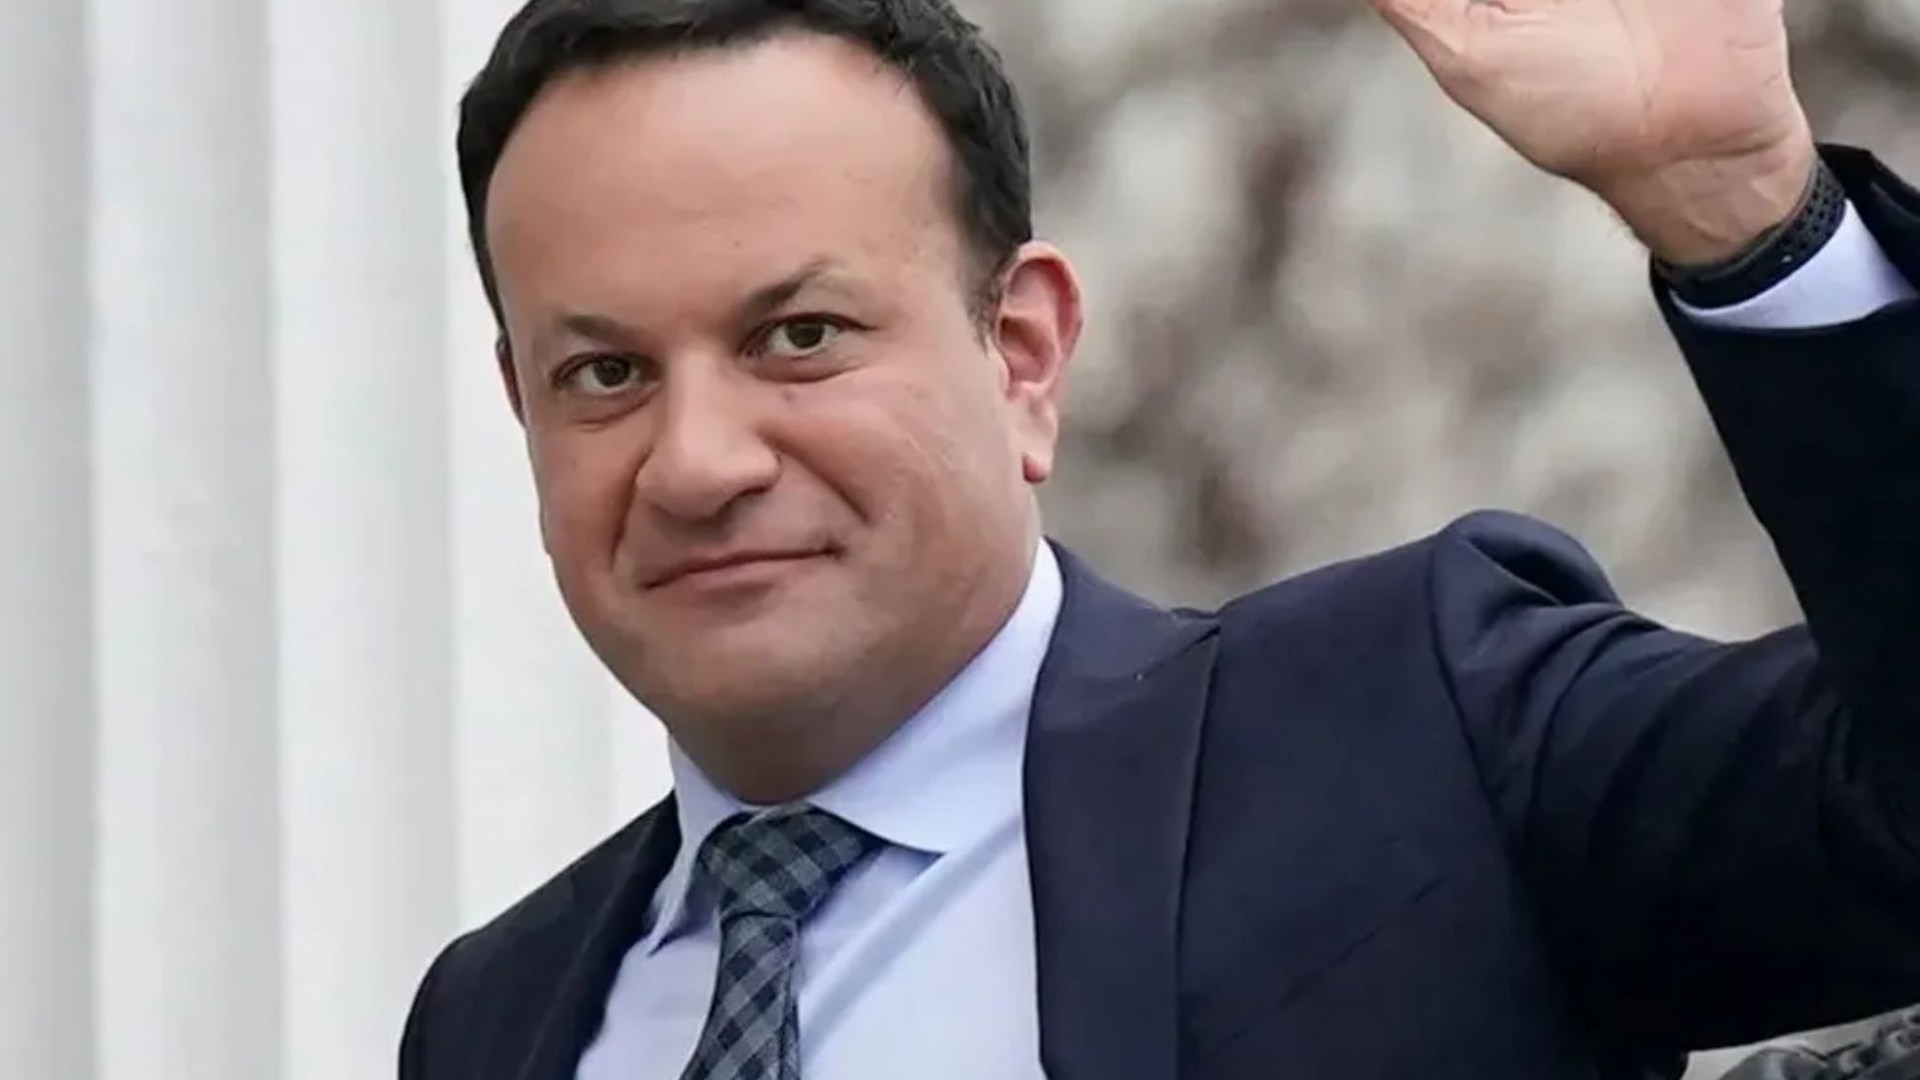 Gardai foil far-right plot to kill Leo Varadkar with foreign ex-army soldier as intended shooter of former Taoiseach [Video]